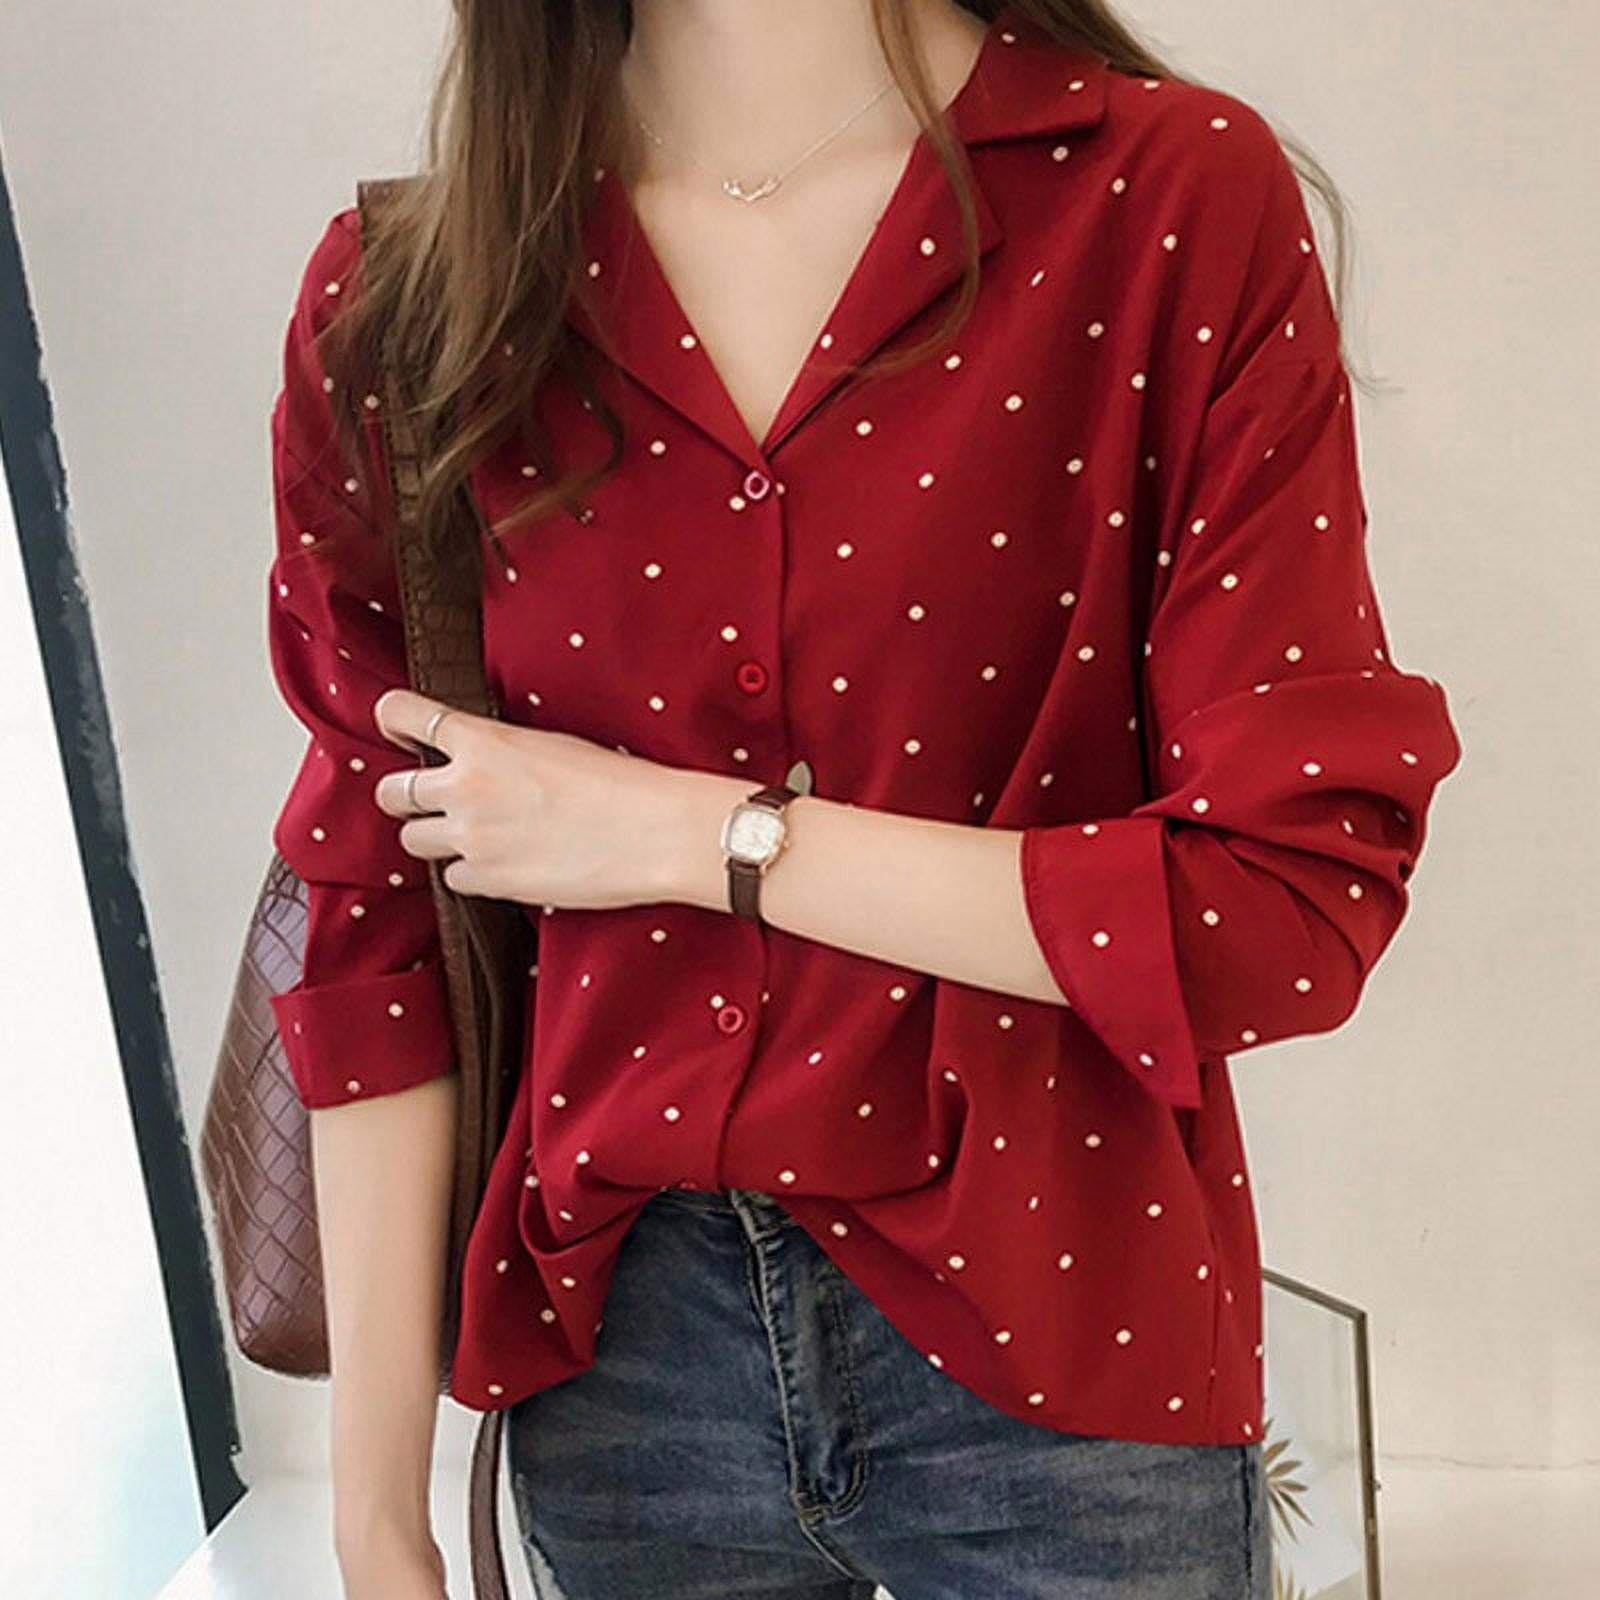  n/a Long Sleeve Blouse Women Beading Stand Collar Dot Chiffon Blouse  Shirt Women Tops Blouses Shirts (Color : A, Size : L Code) : Clothing,  Shoes & Jewelry